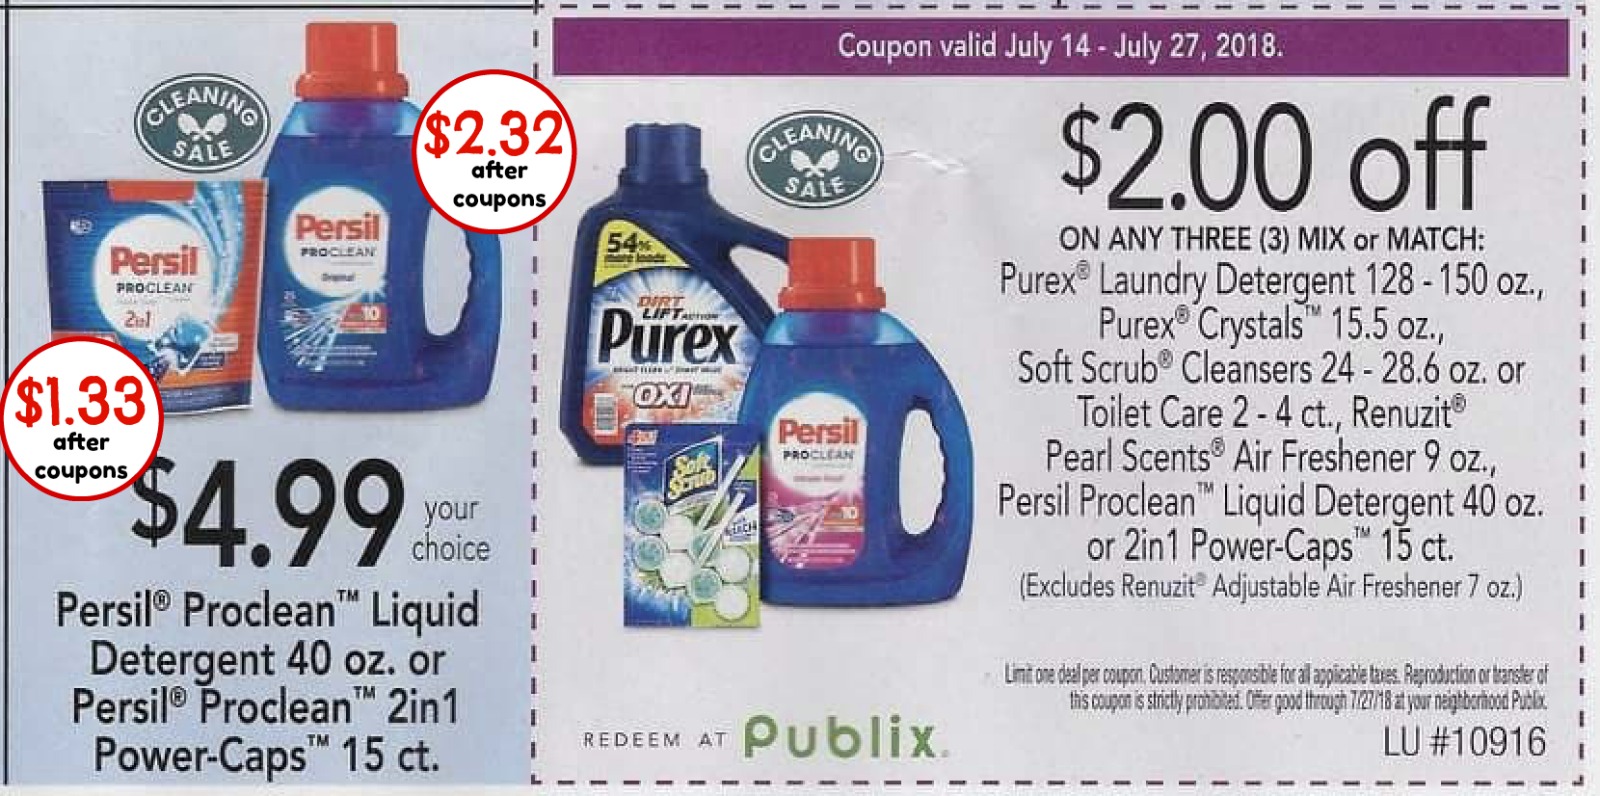 Fantastic Deals On Persil Laundry Detergent Products At Publix As Low